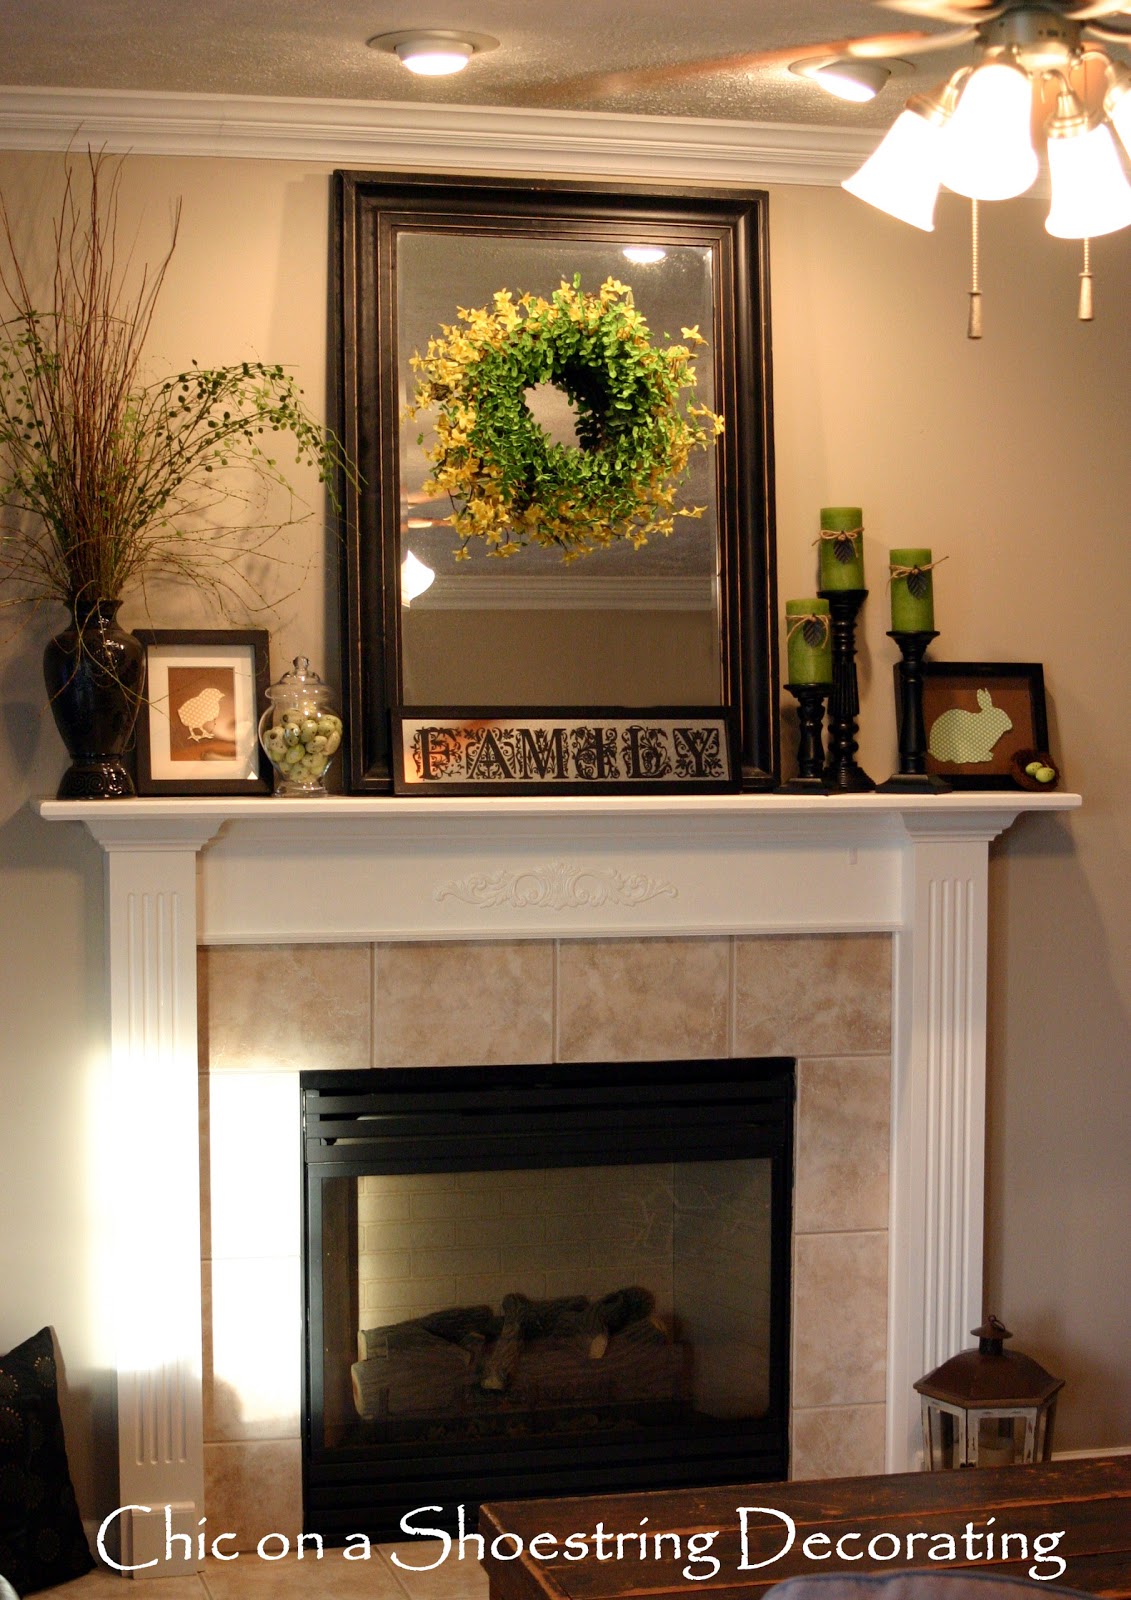 Chic on a Shoestring Decorating: Easter Mantel on the Cheap